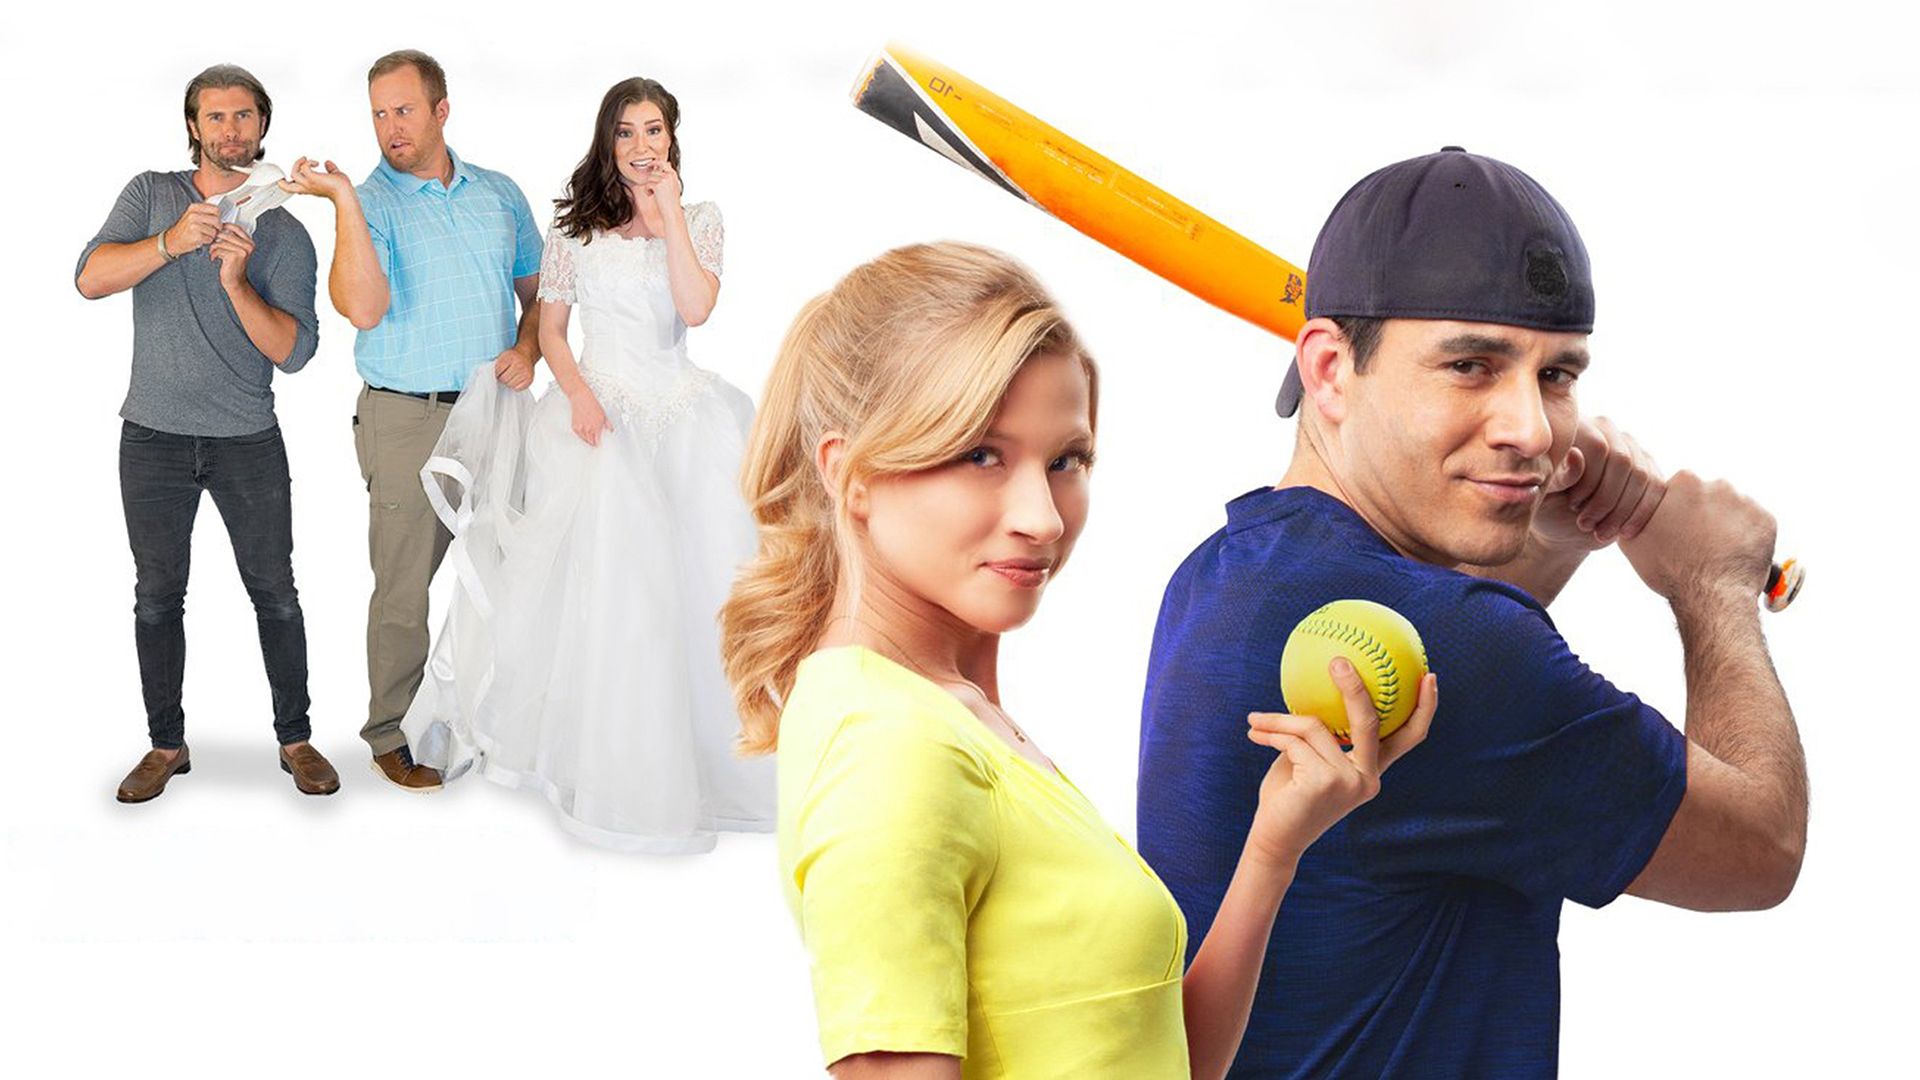 Romance in the Outfield: Double Play background